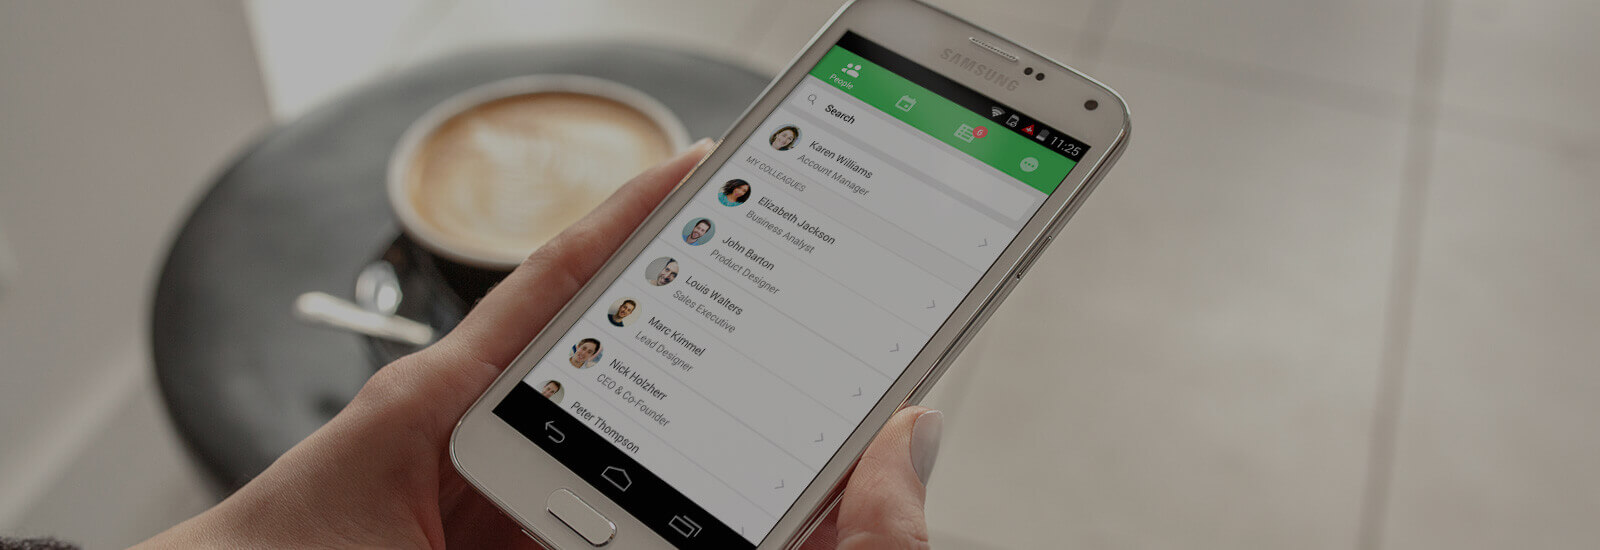 Air for Mobile – Android HR app now available